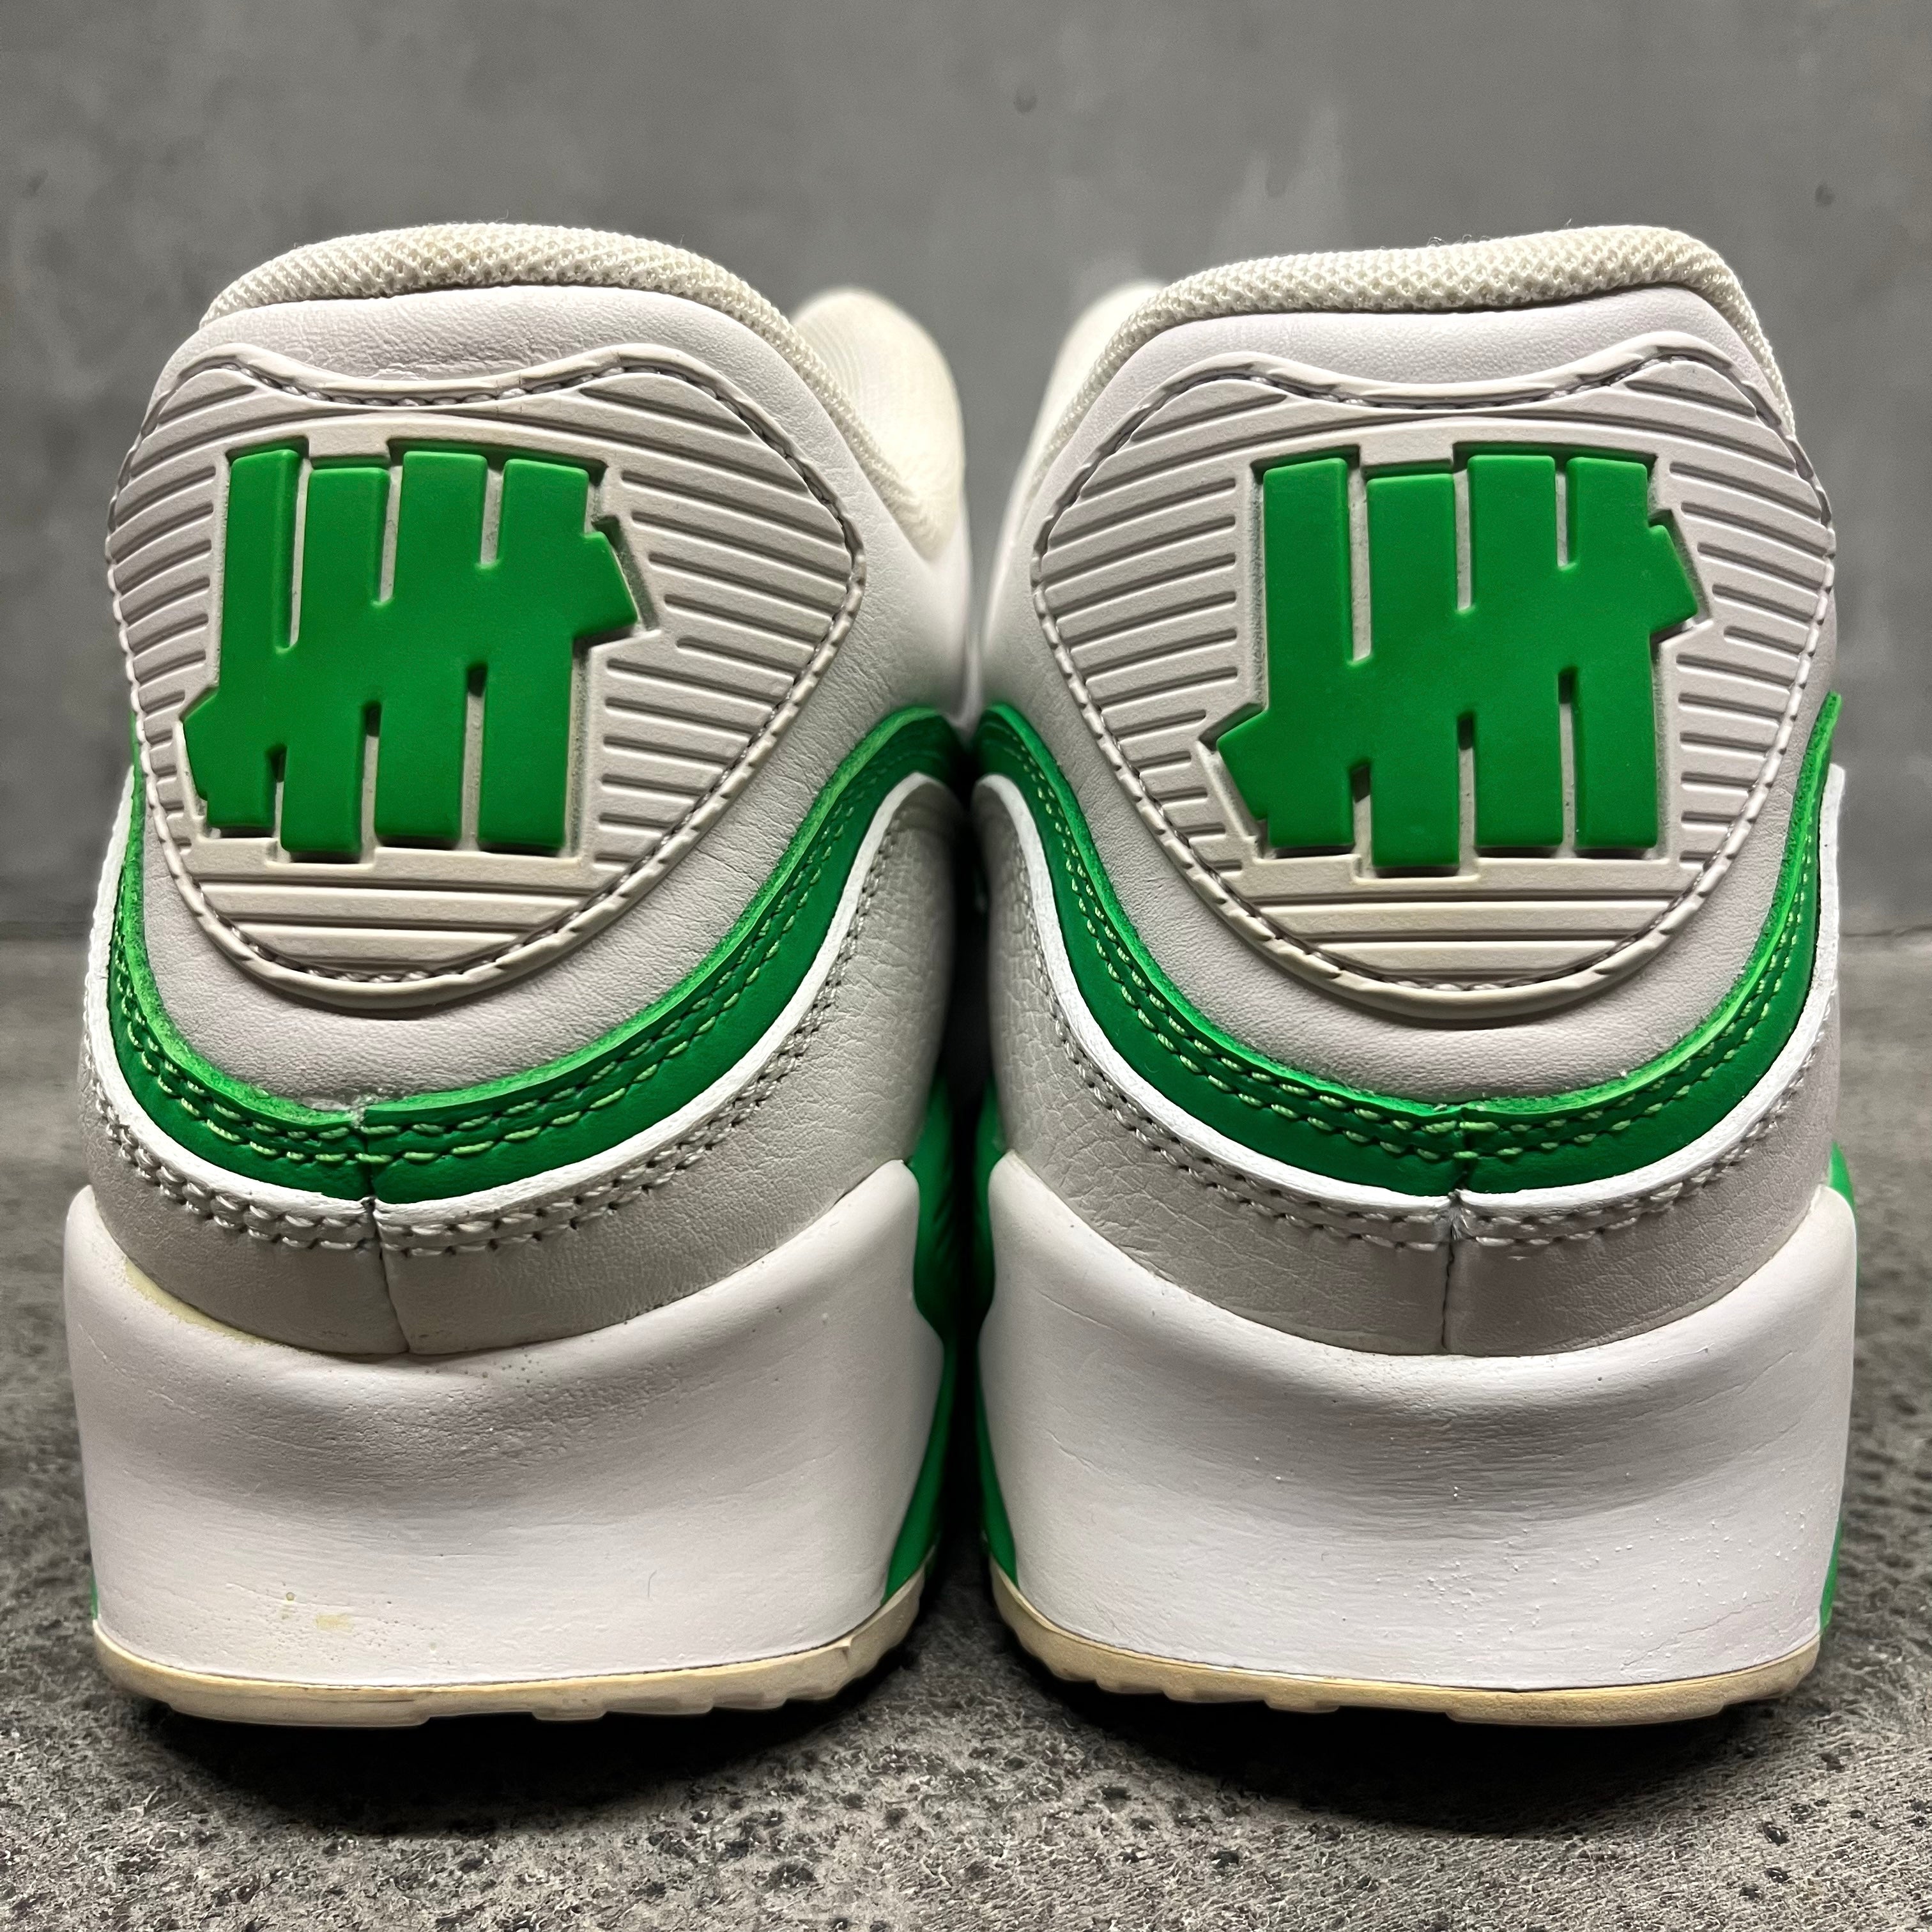 【US10.5】NIKE AIR MAX 90 "Undefeated White Green" CJ7197-104